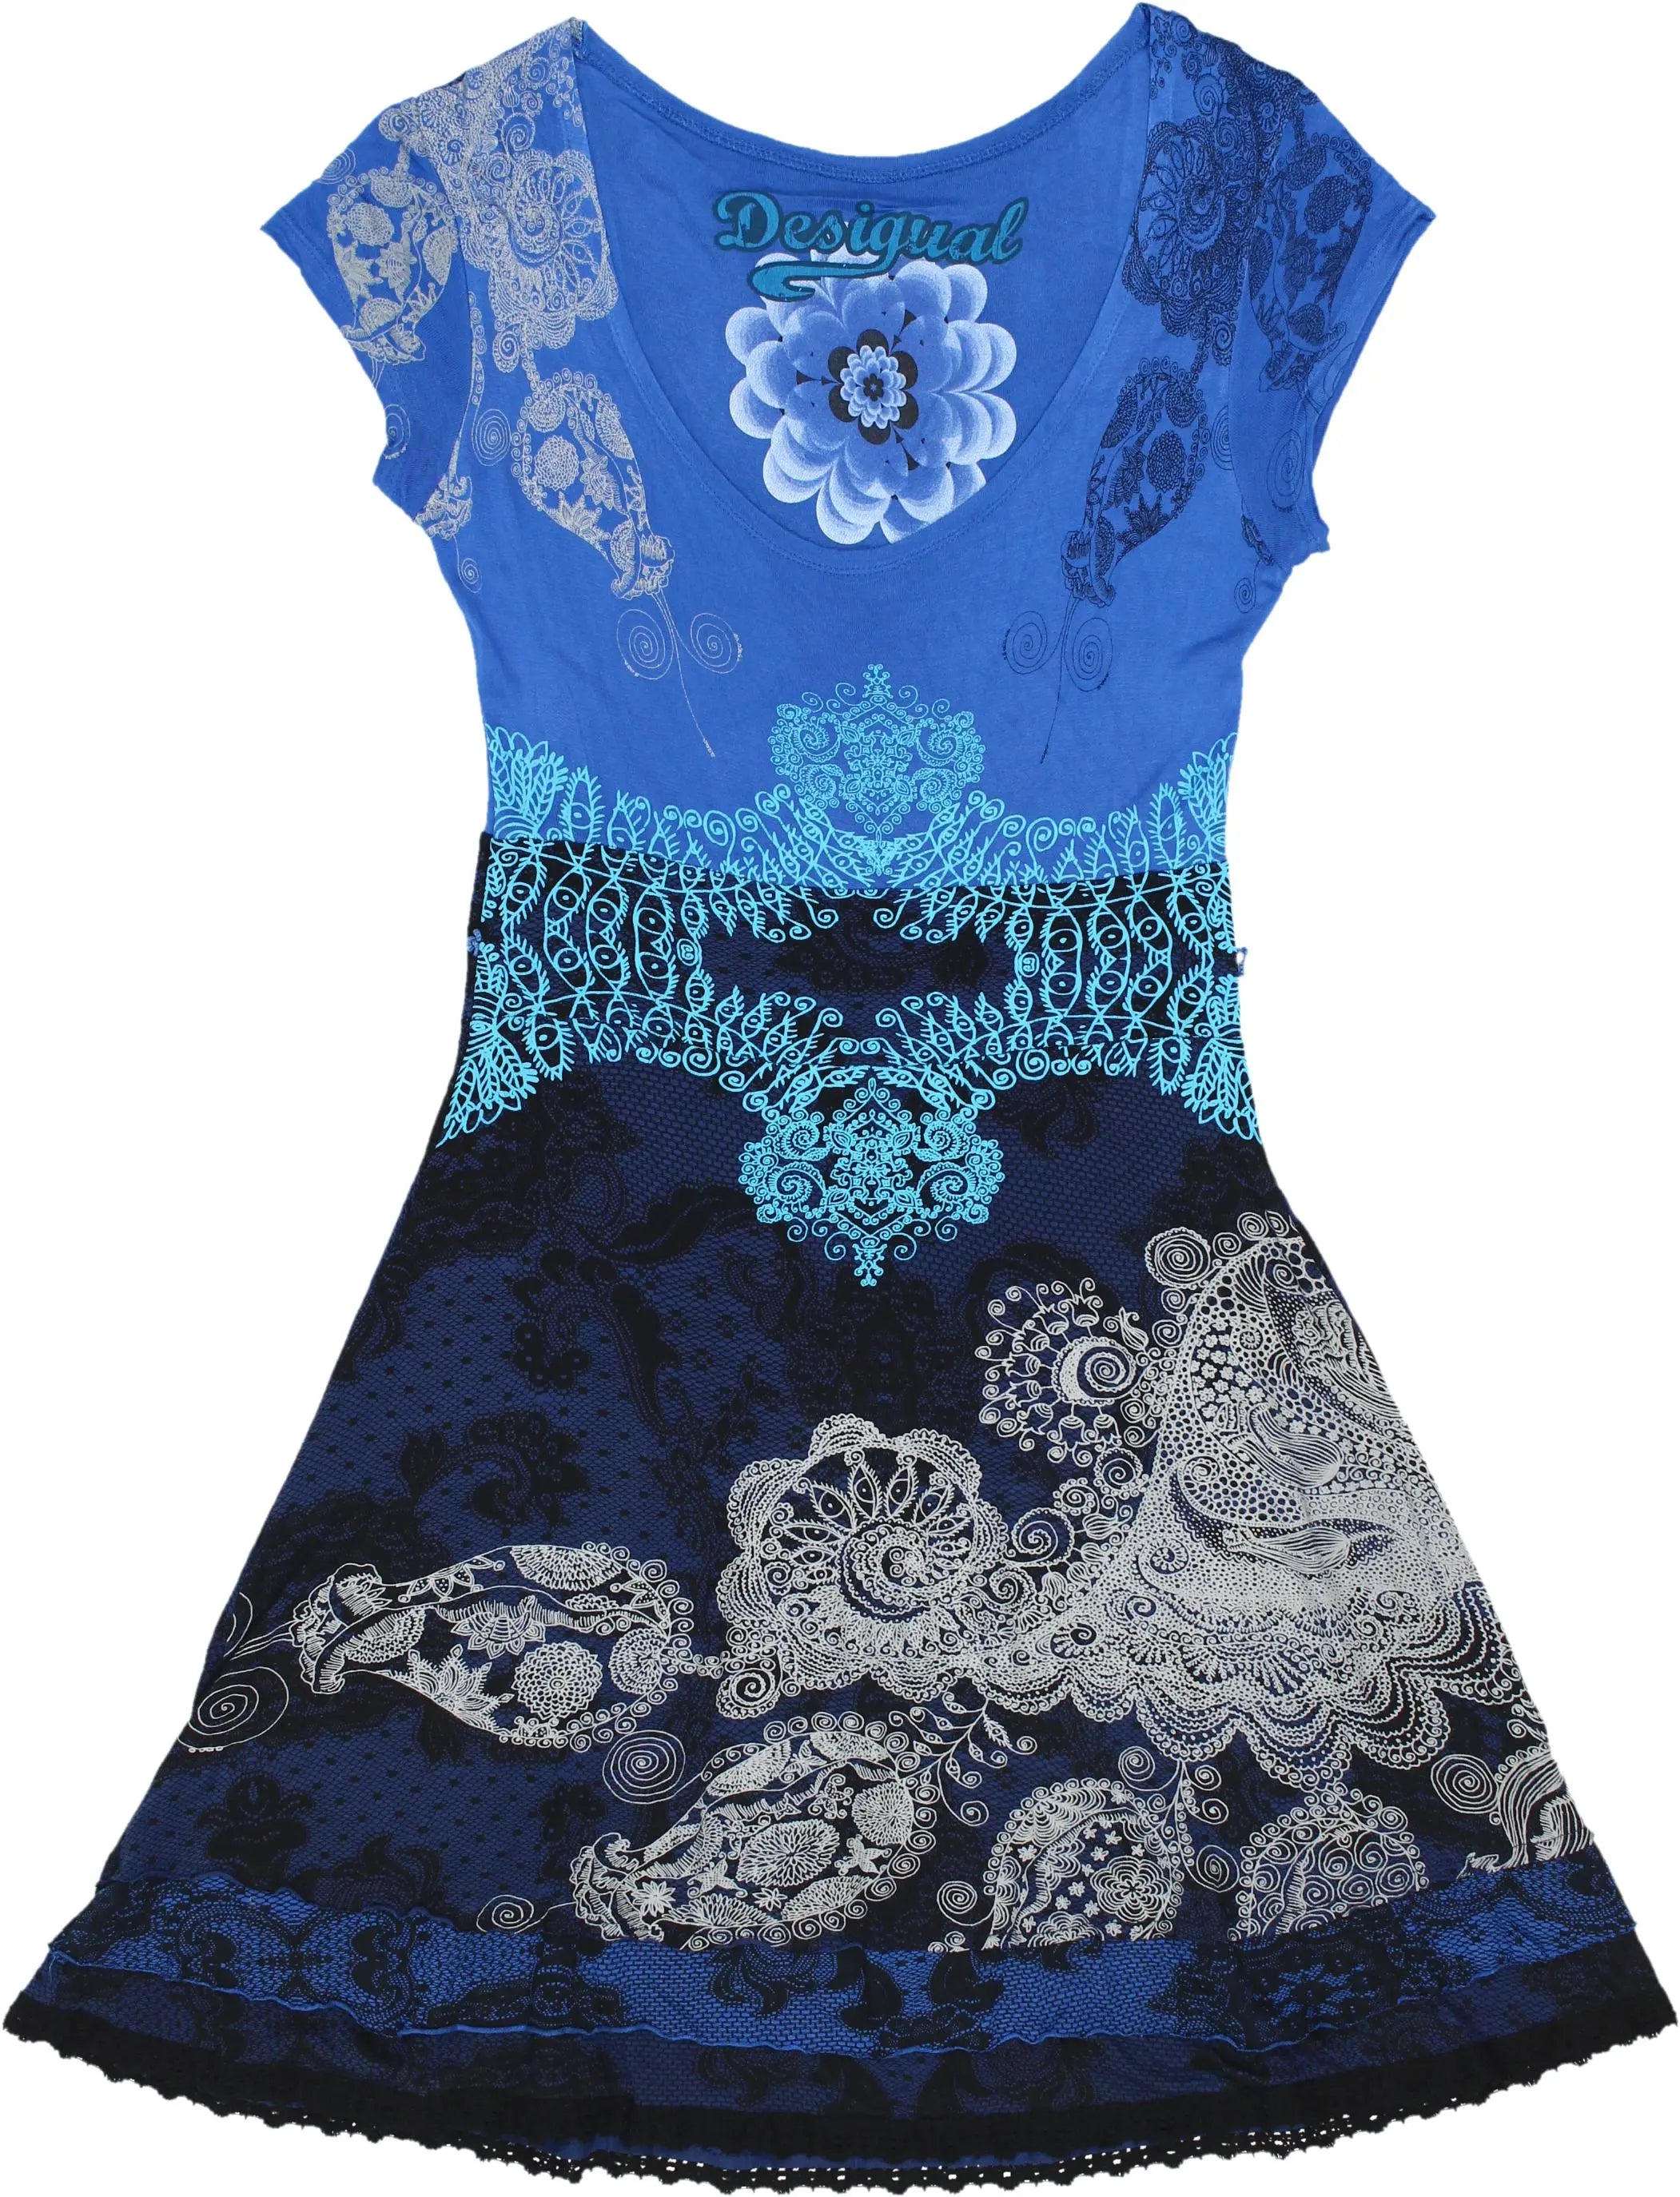 Desigual - Blue Dress by Desigual- ThriftTale.com - Vintage and second handclothing